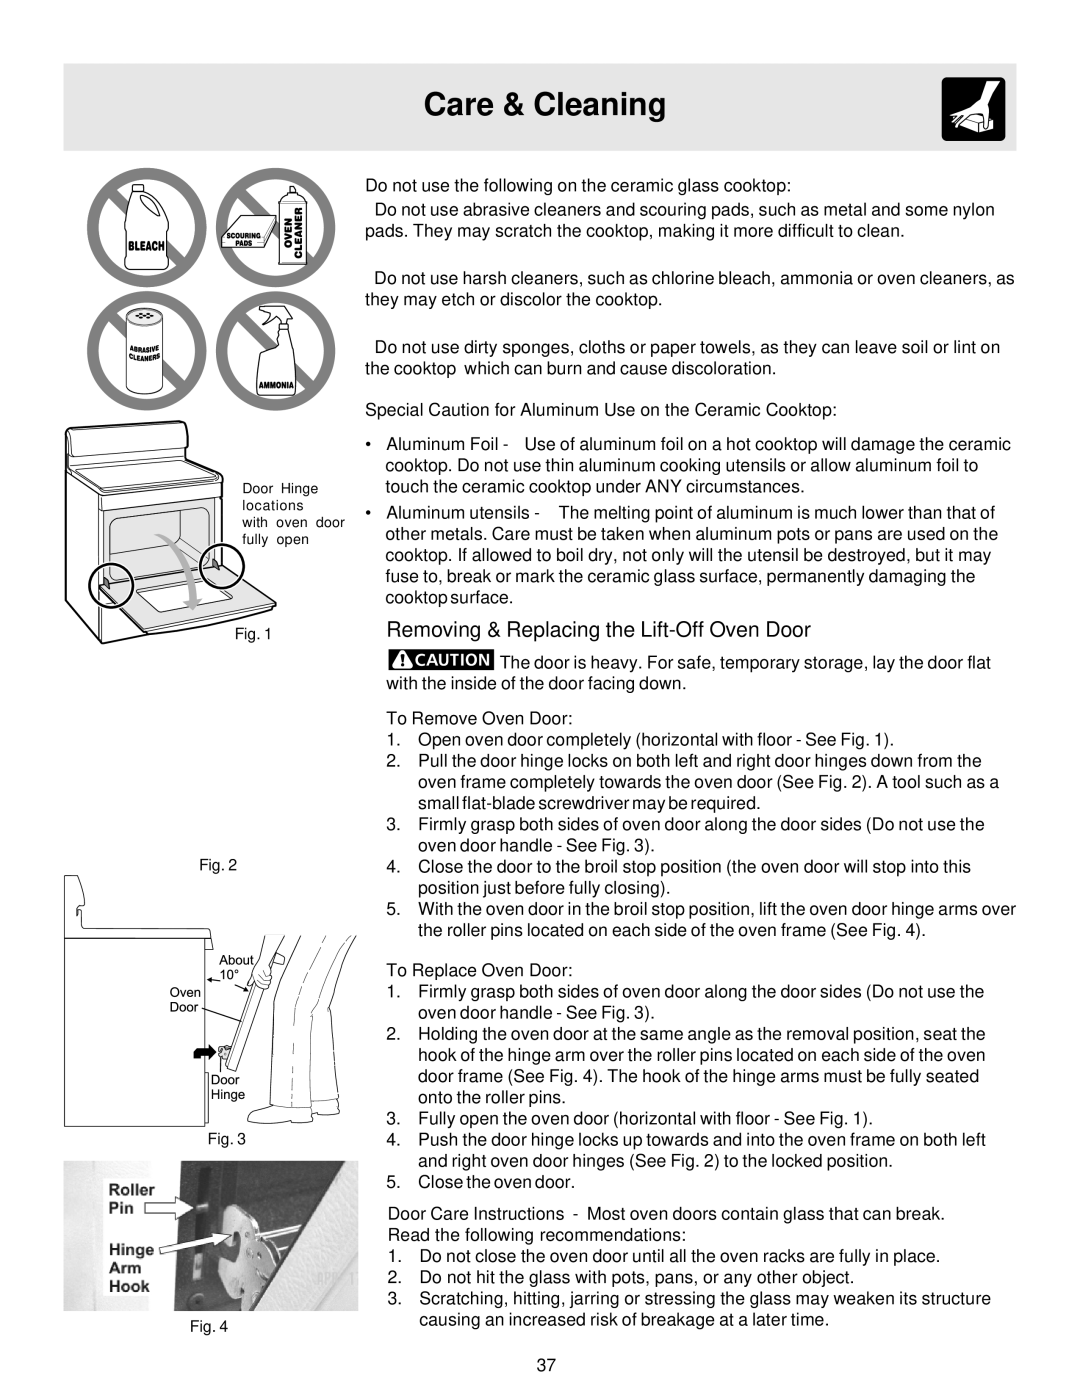 Electrolux ES510 Removing & Replacing the Lift-Off Oven Door, Do not use the following on the ceramic glass cooktop 